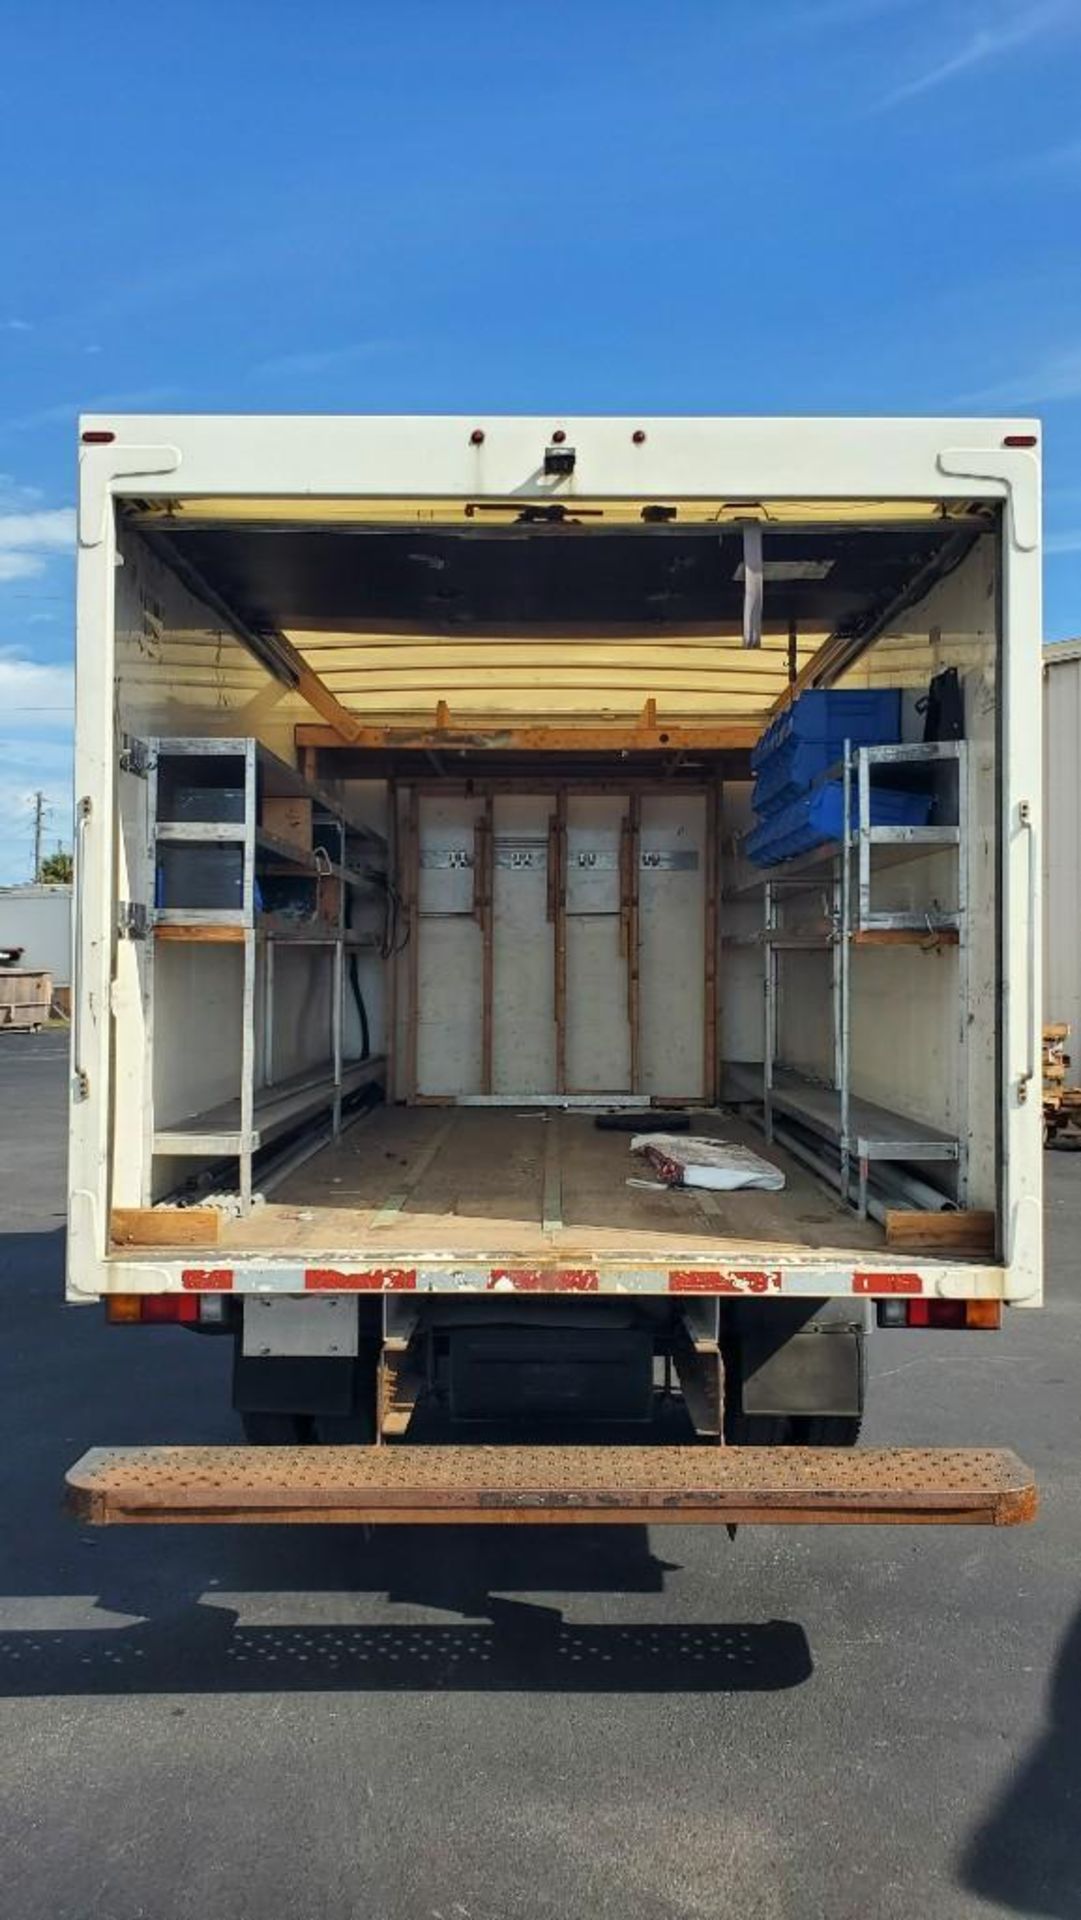 2015 MITSUBISHI FUSO FE180 BOX TRUCK APPROX 14' BOX, DIESEL ENGINE, AUTOMATIC TRANSMISSION - Image 13 of 39